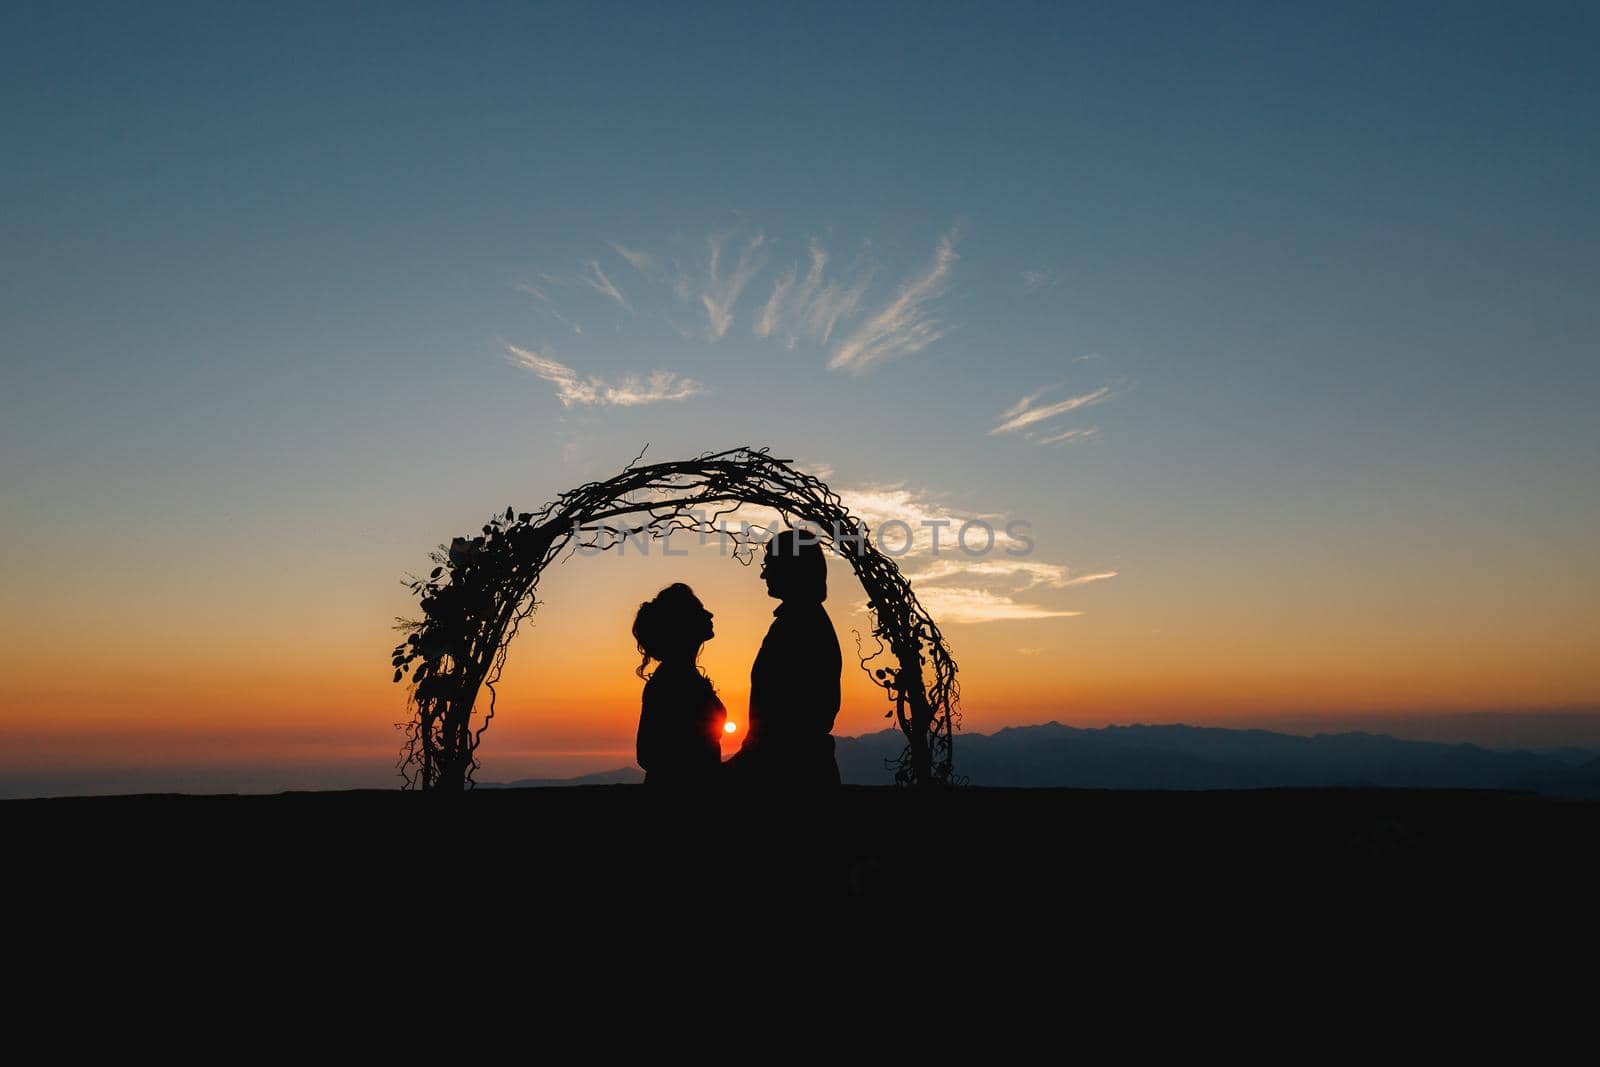 Silhouettes of bride and groom holding hands near the wedding arch at sunset at the wedding ceremony by Nadtochiy